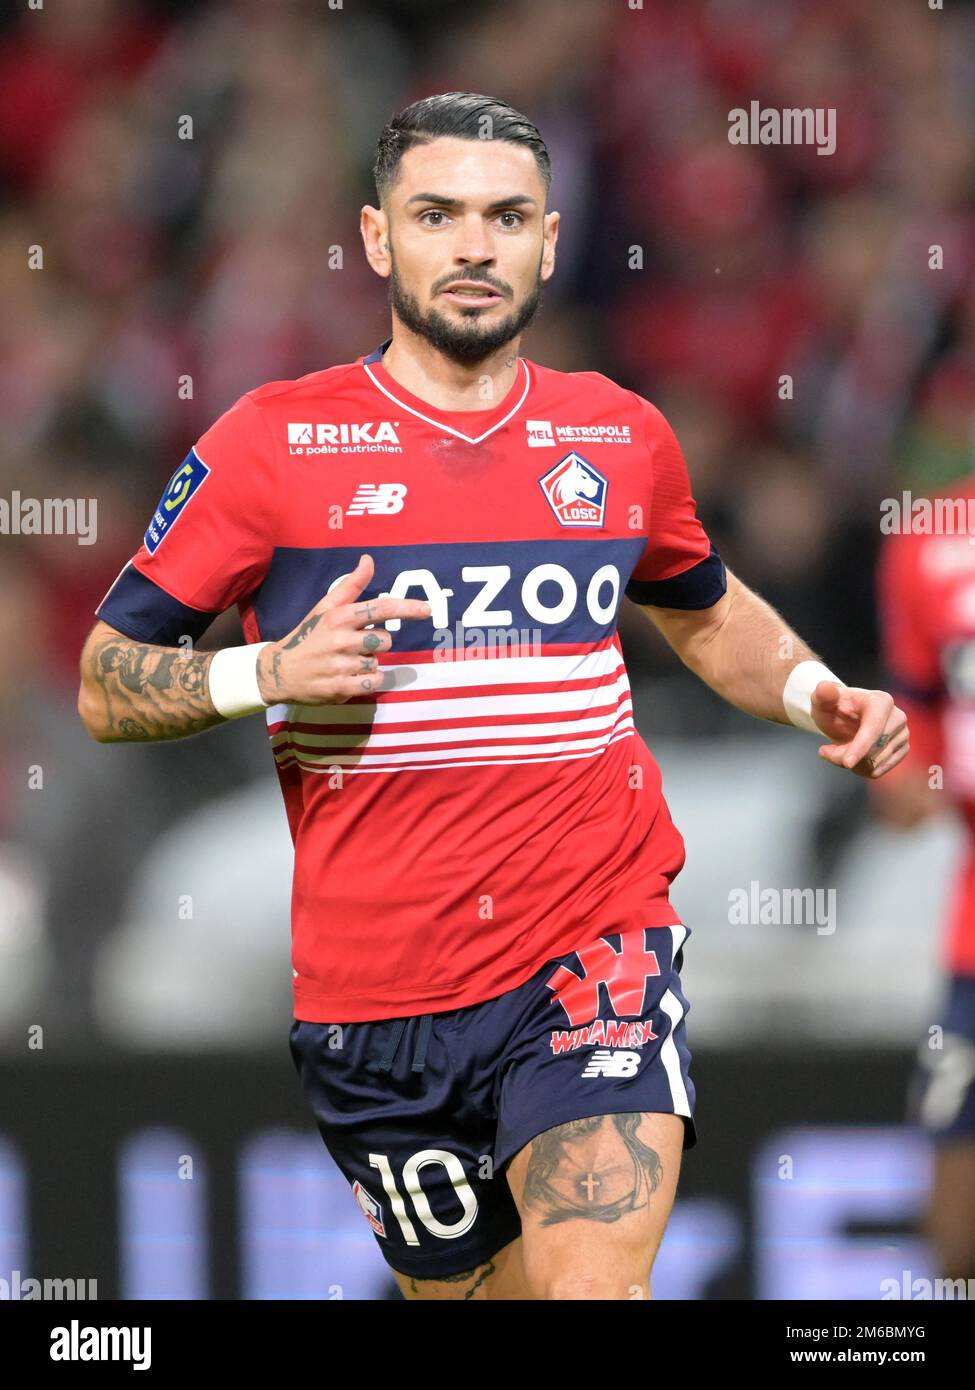 LILLE - Remy Cabella of LOSC Lille during the French Ligue 1 match between  Lille OSC and Stade de Reims at Pierre-Mauroy Stadium on January 2, 2022 in  Lille, France. AP